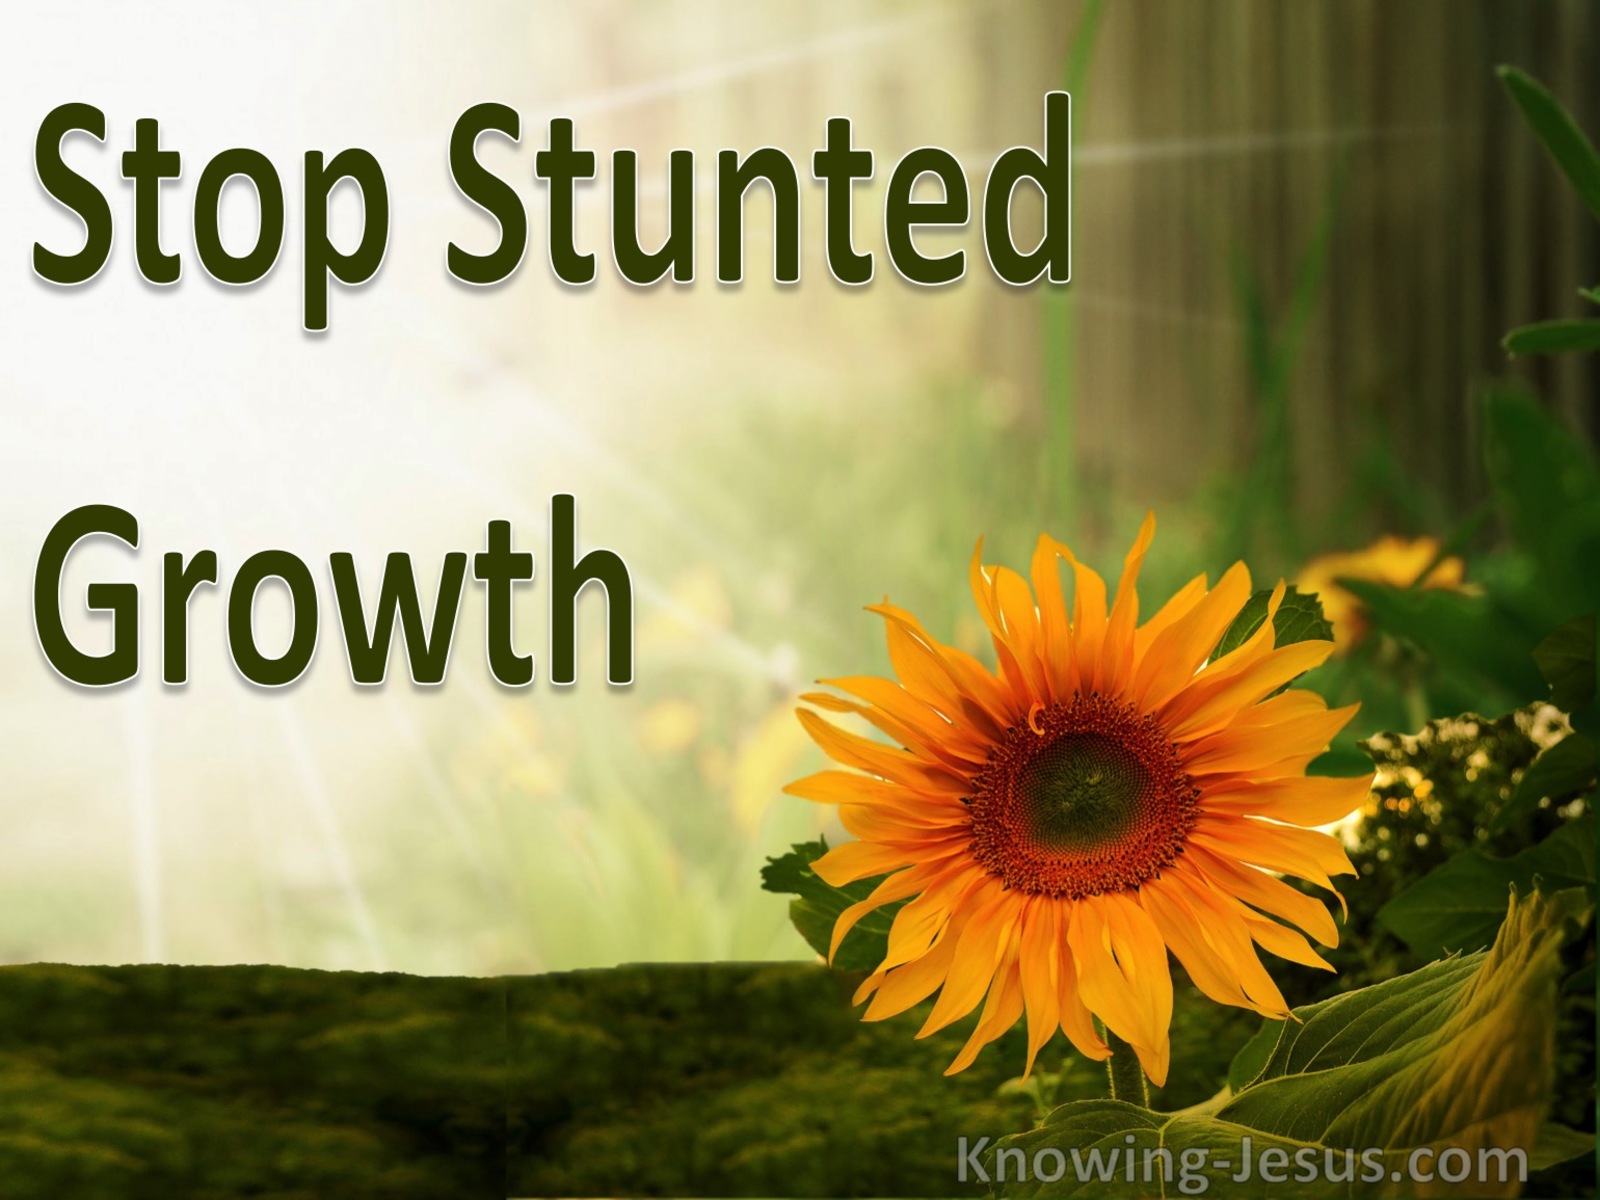 Stop Stunted Growth (devotional)04-13 (green)